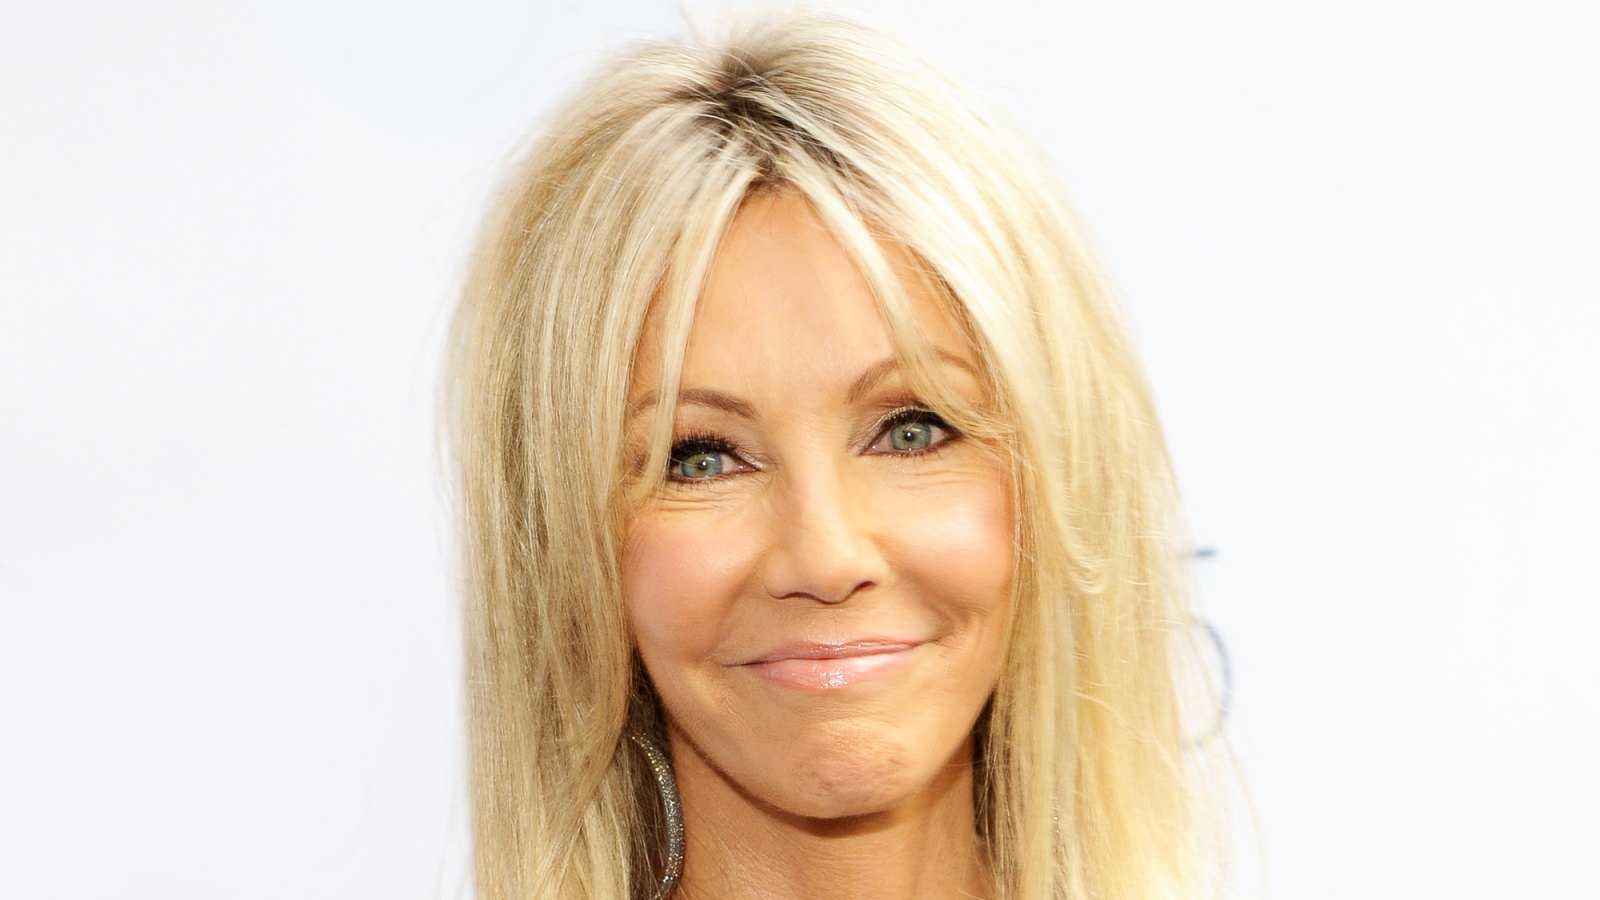 Heather Locklear attends TNT 25TH Anniversary Party during Turner Broadcasting's 2013 TCA Summer Tour at The Beverly Hilton Hotel in Beverly Hills, California.